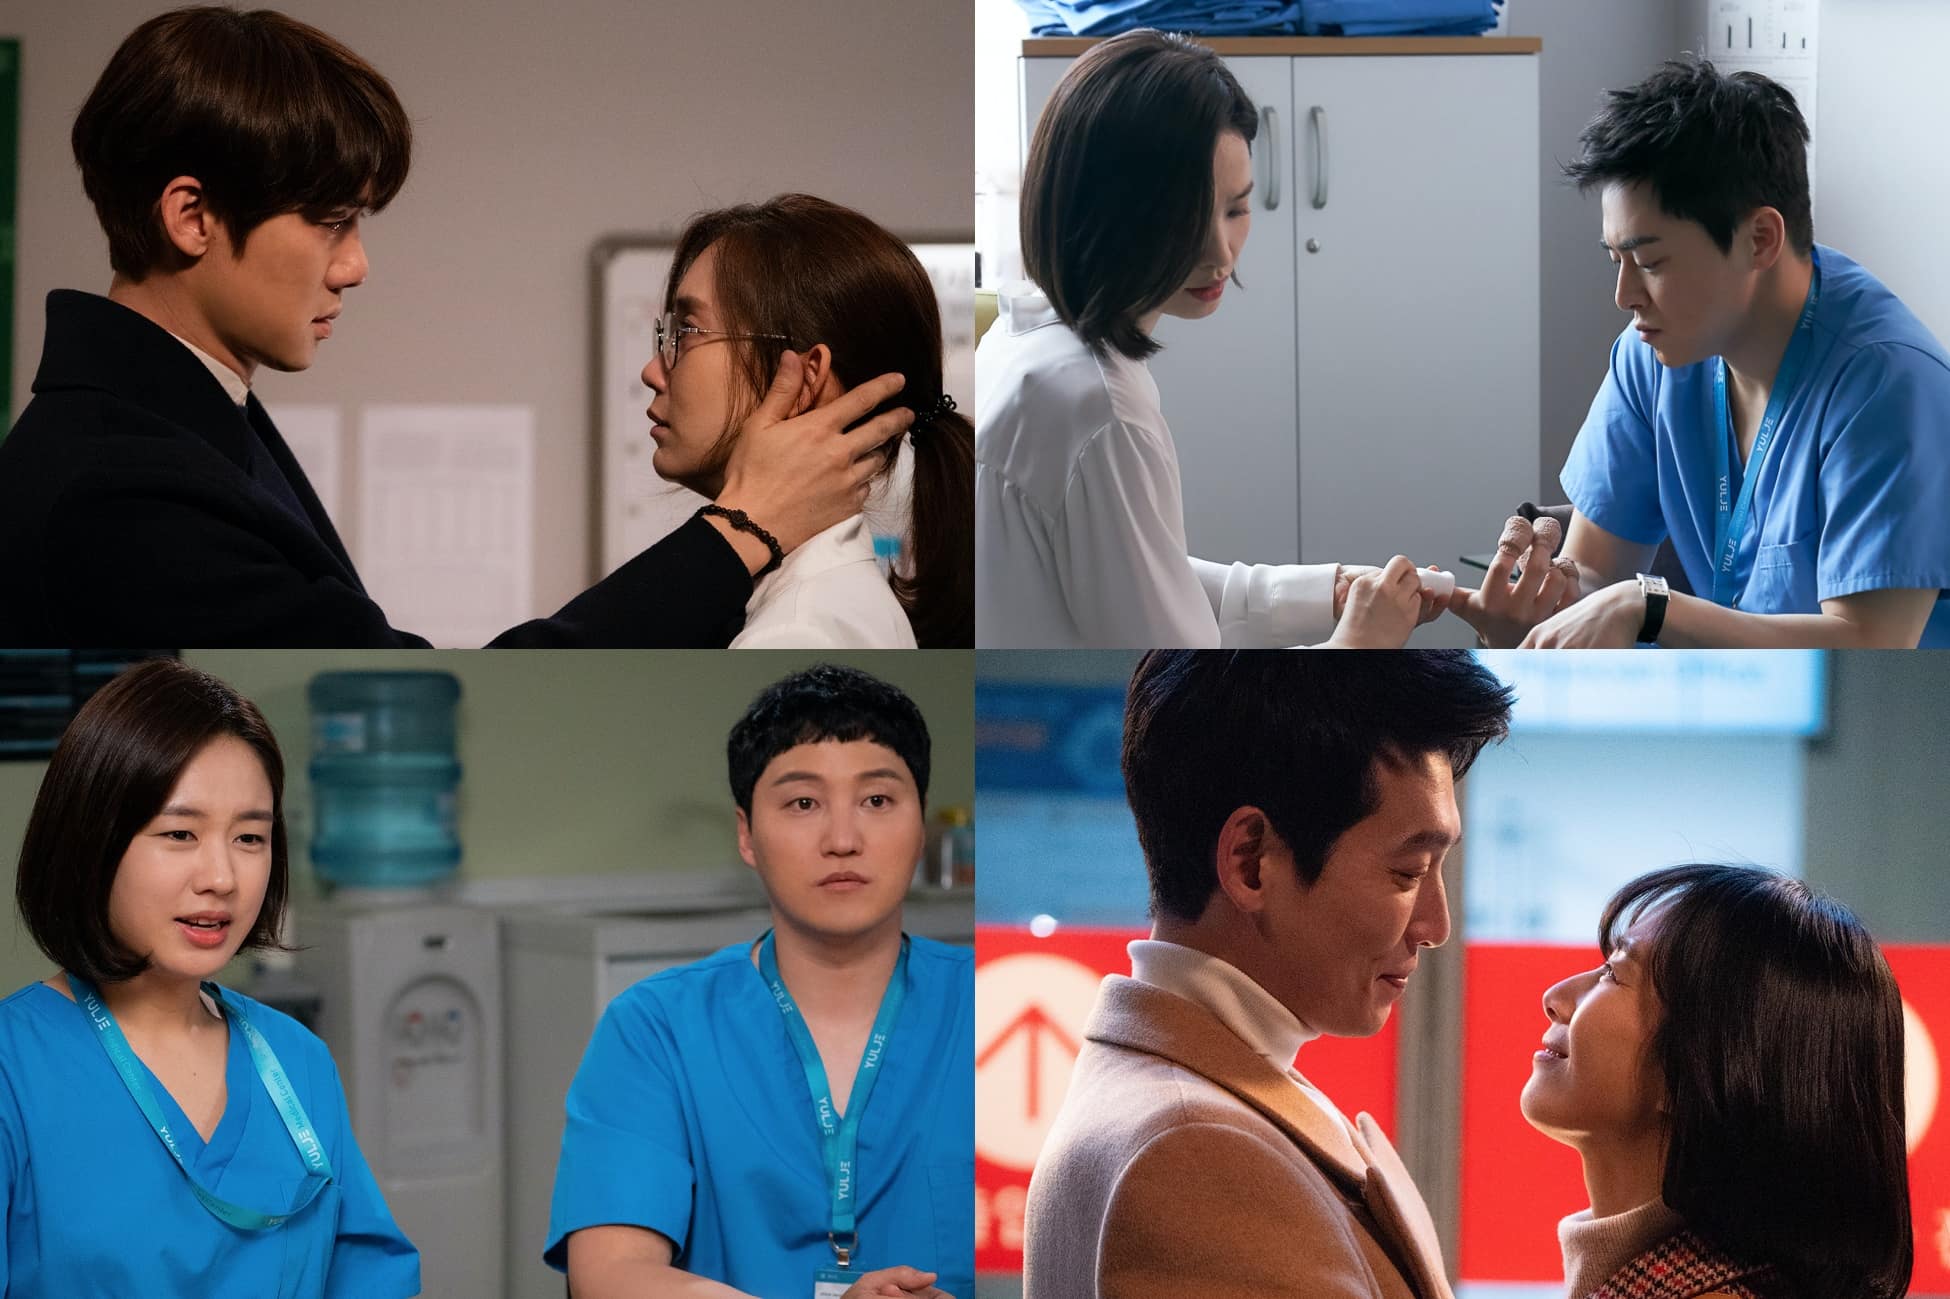 Things to look forward to in 'Hospital Playlist Season 2'